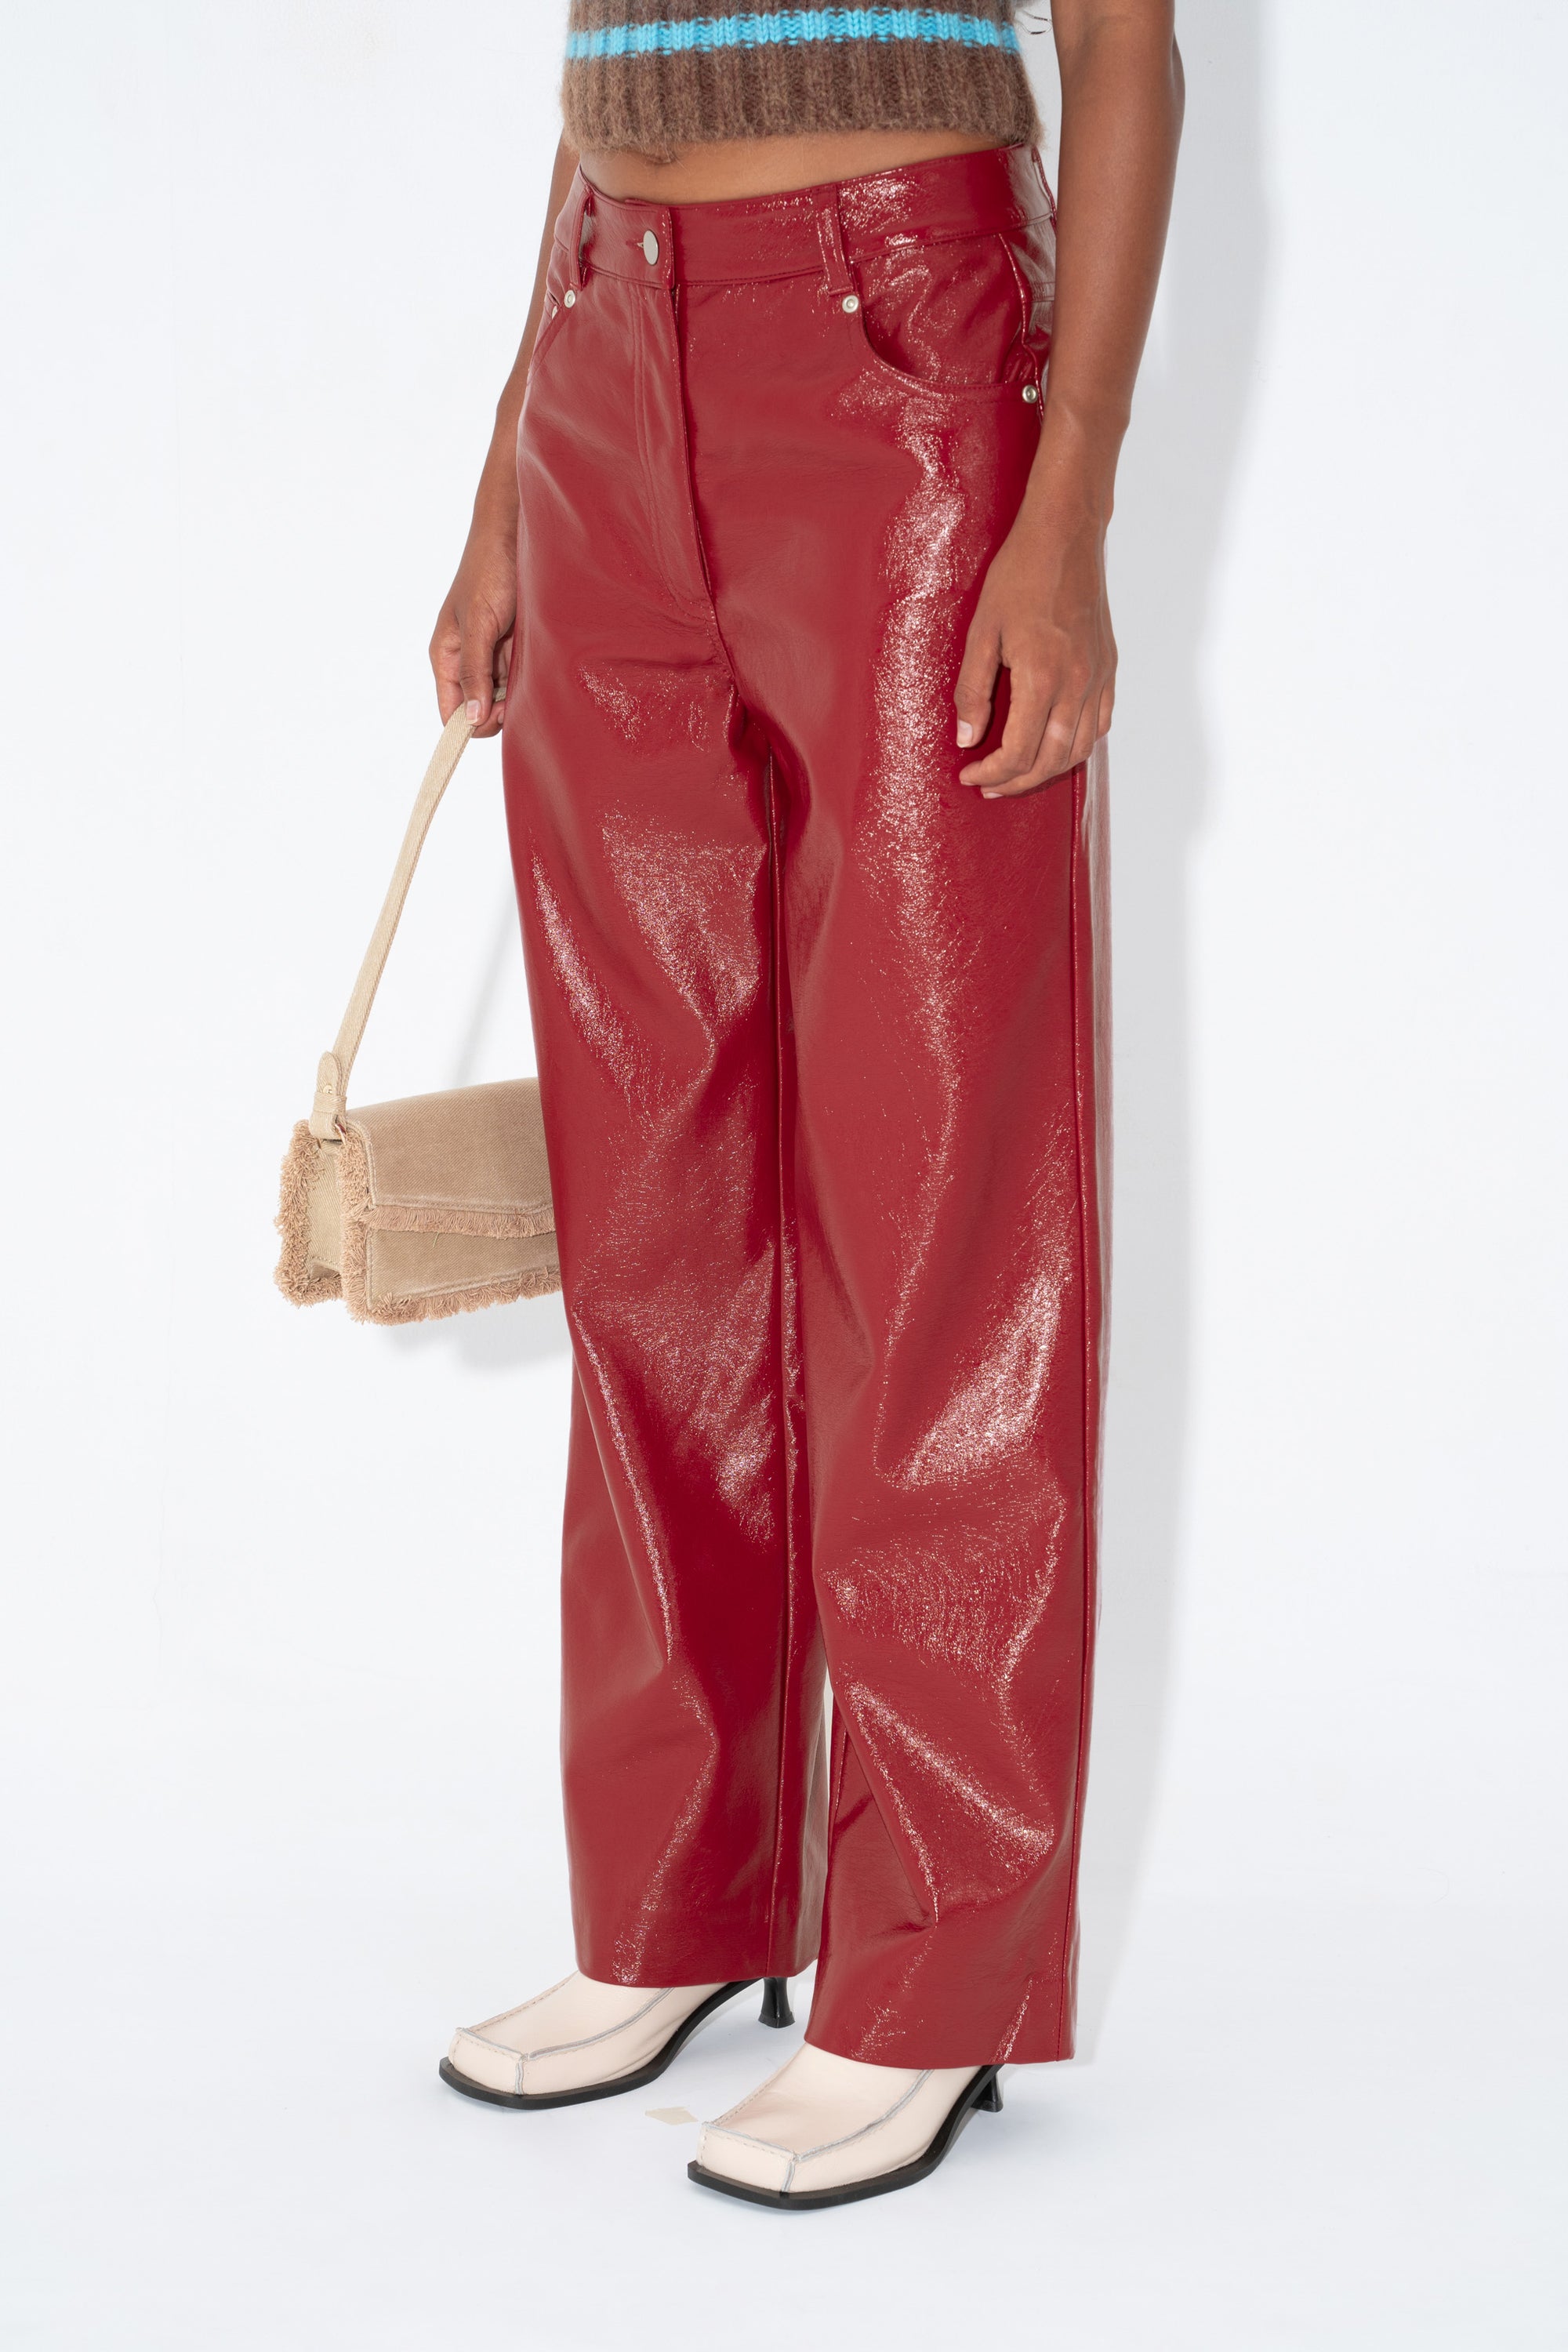 Arthur Apparel Mid Rise Red Patent Leather Trousers